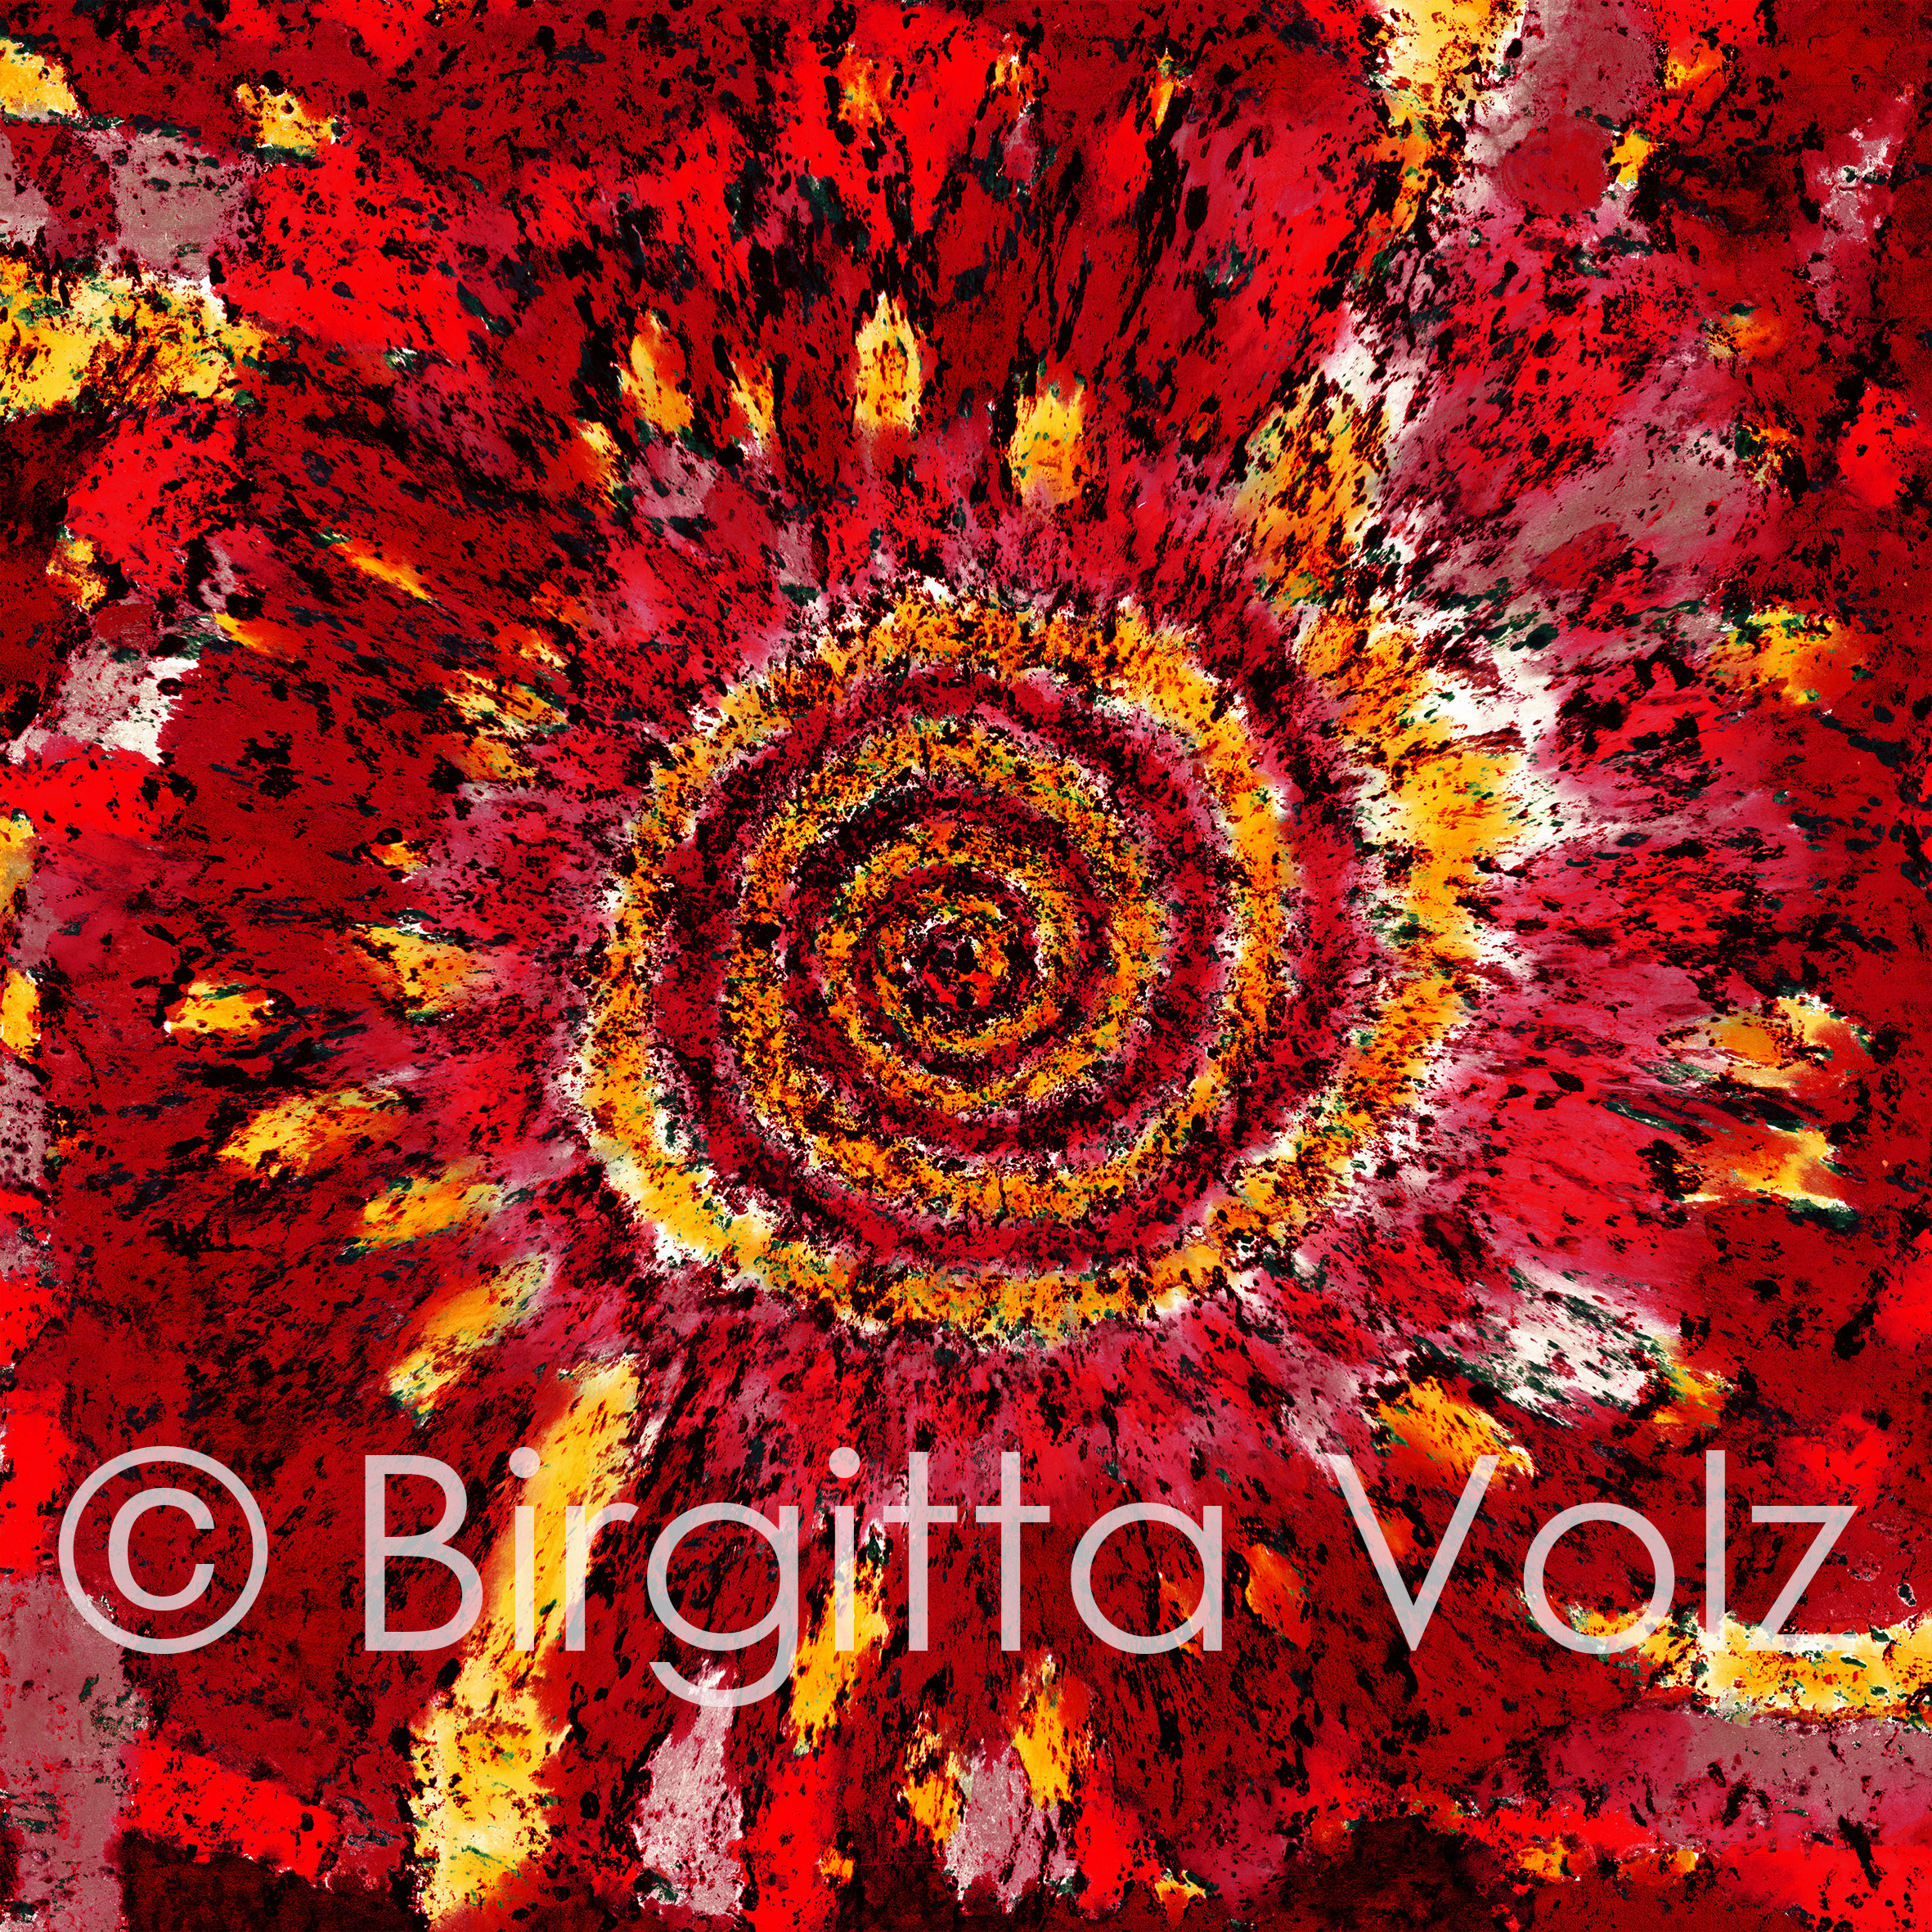 Red Galaxy, 2022, 95 x 95 cm, digital variation of the turquoise galaxy